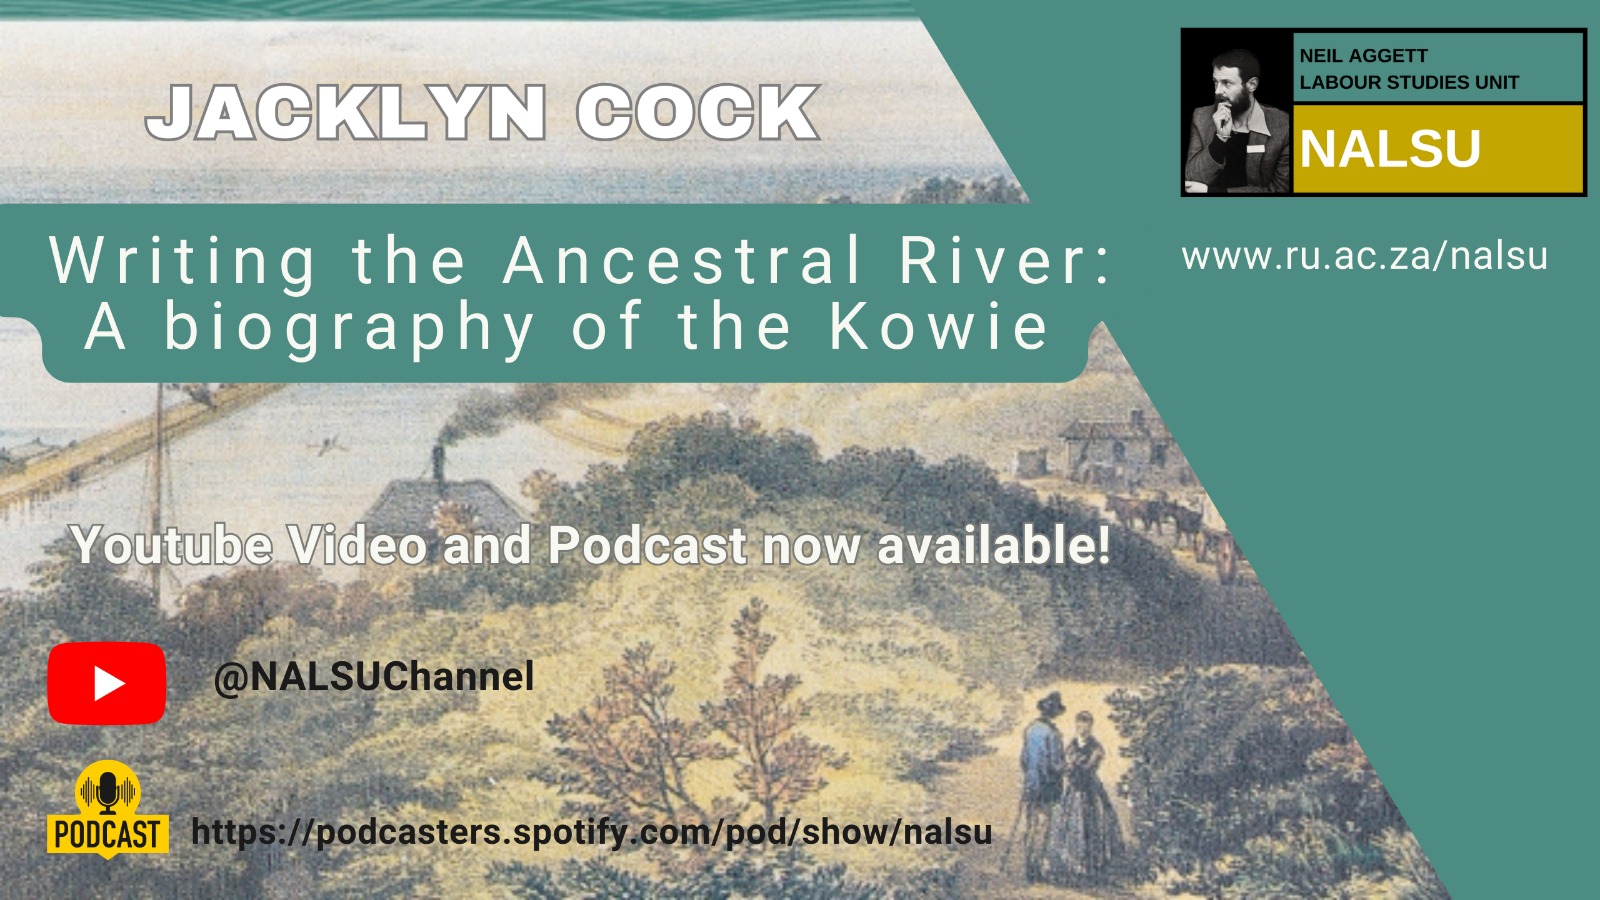 Writing the Ancestral River: A biography of the Kowie